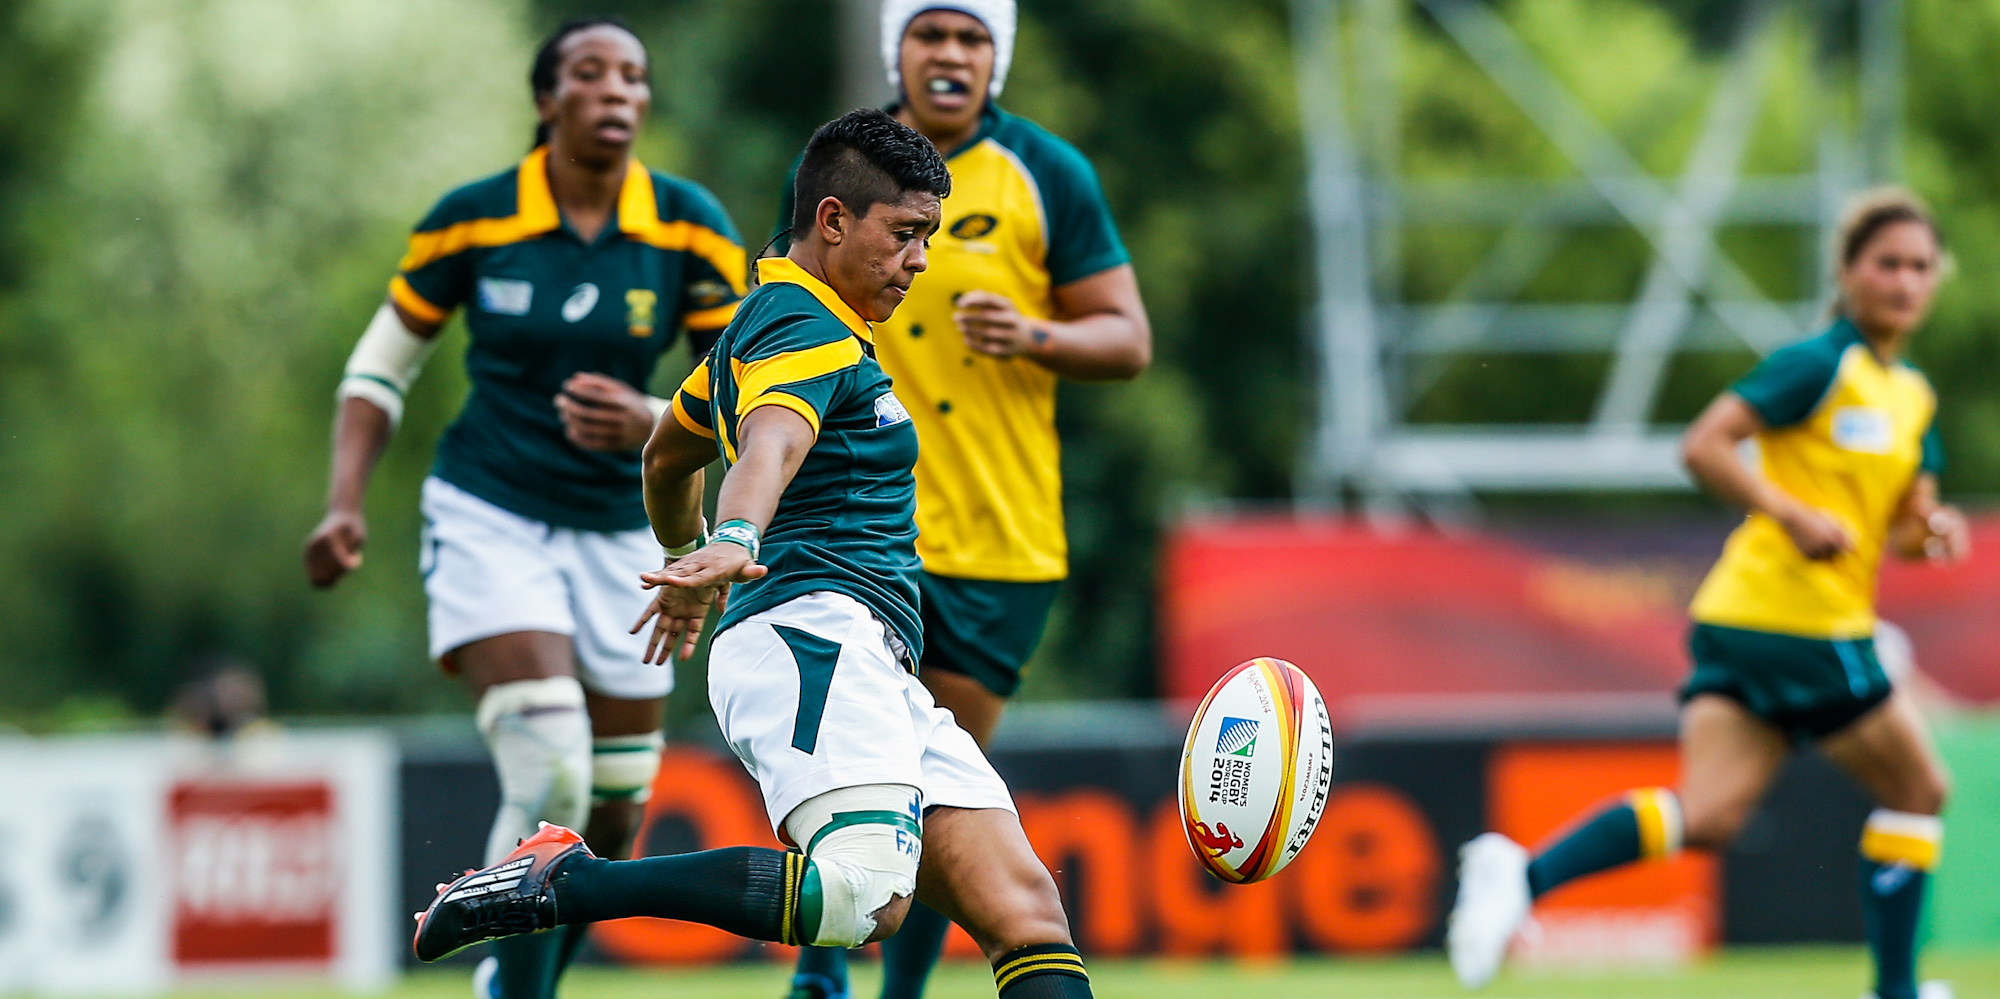 Jordaan captained South Africa at the 2014 Rugby World Cup in France.